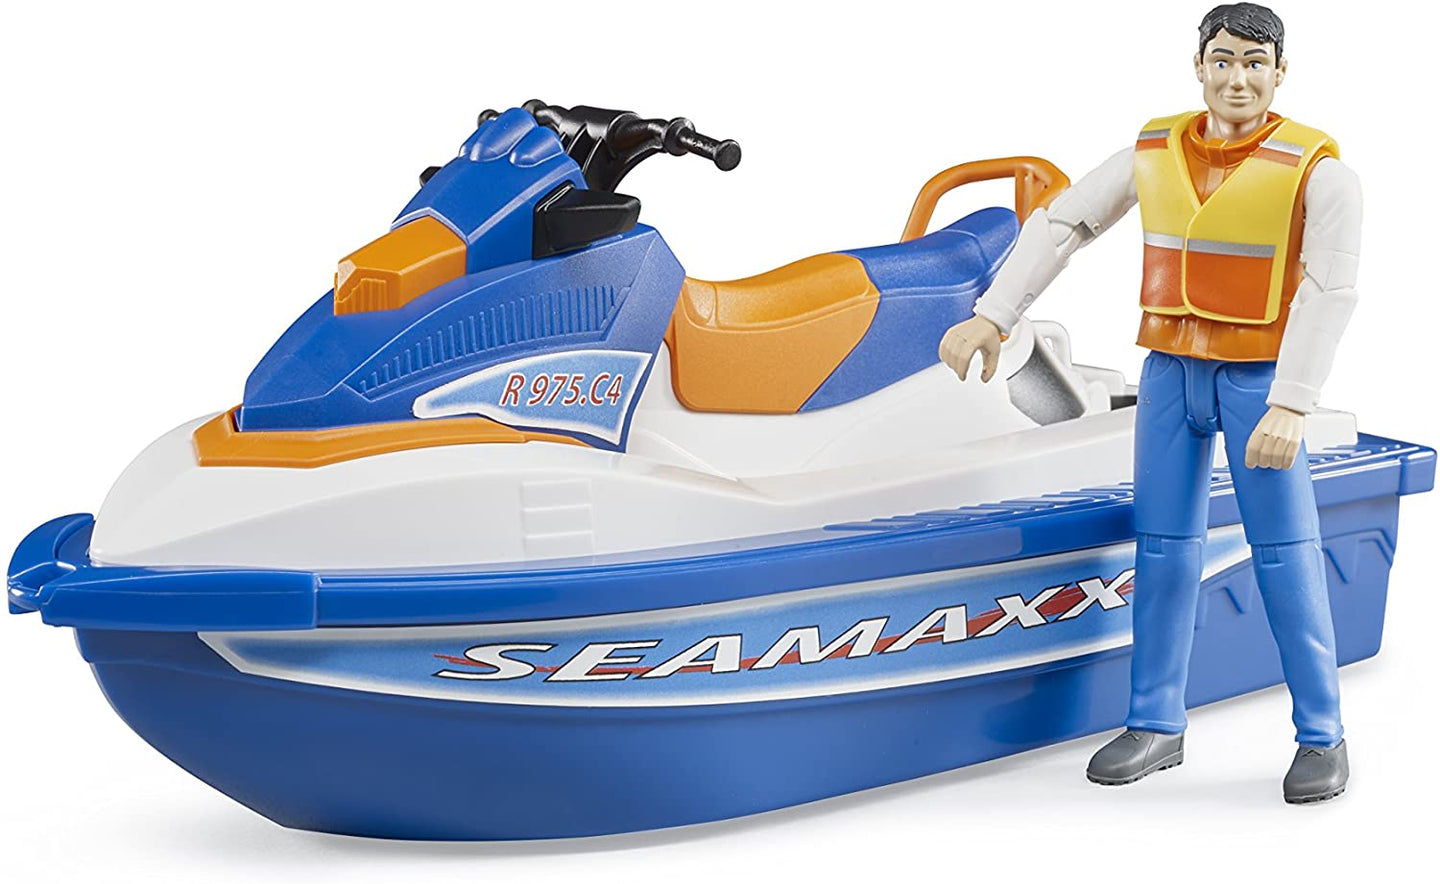 B63150 BRUDER WATER CRAFT WITH FIGURE